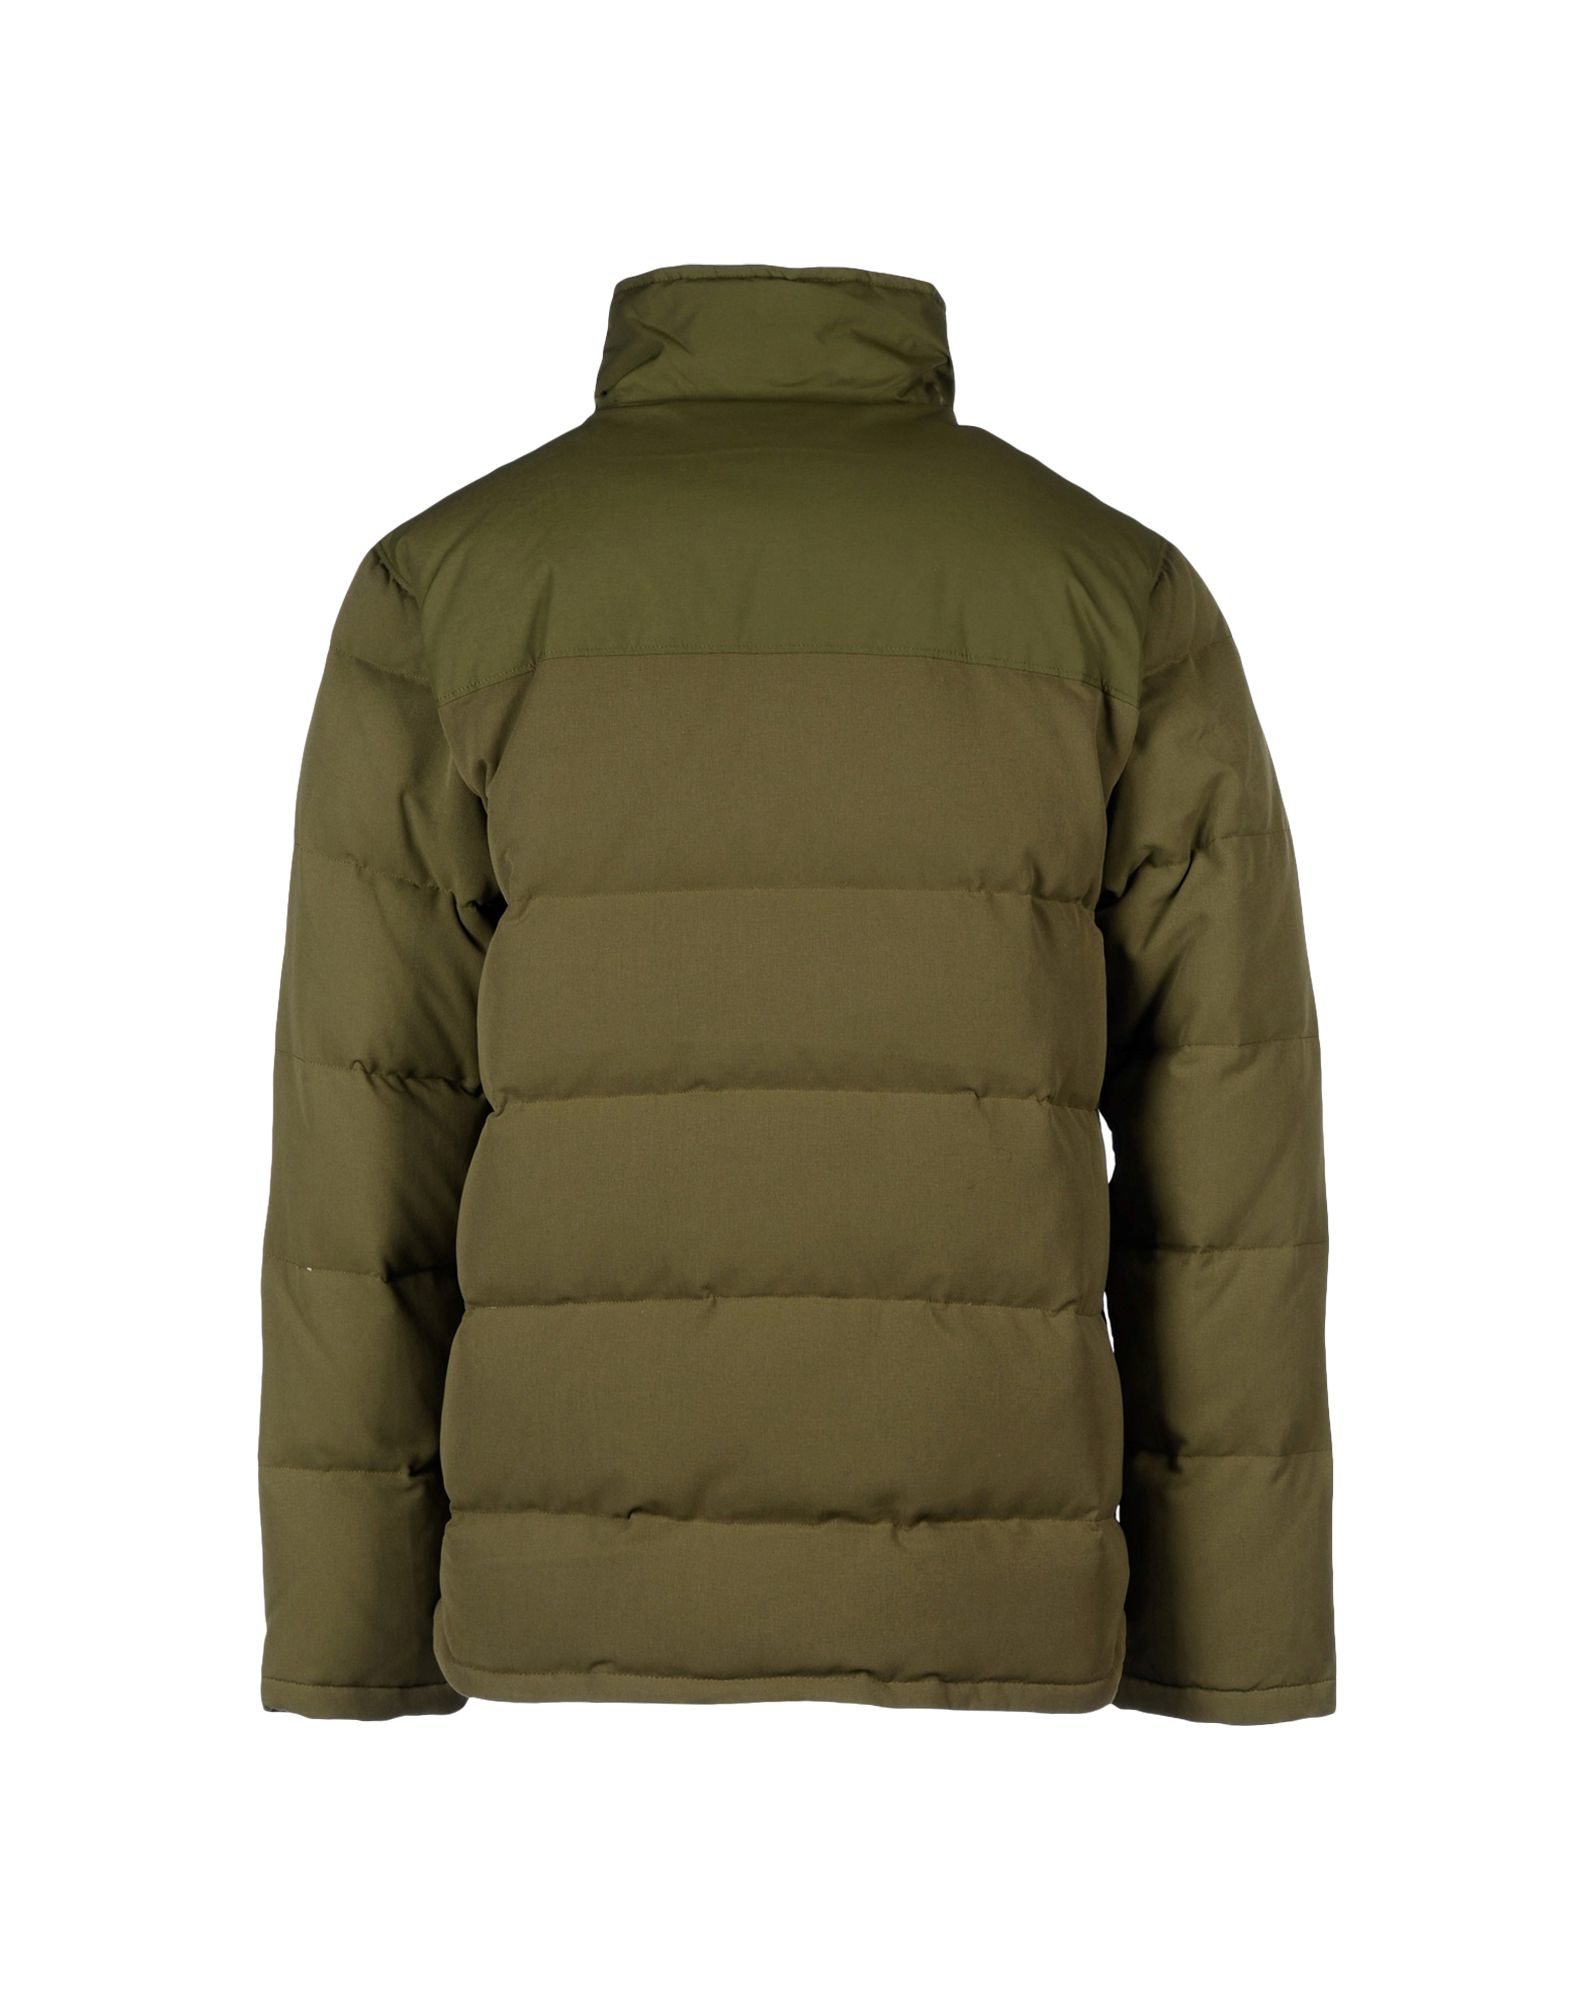 Patagonia Synthetic Down Jacket in Military Green (Green) for Men - Lyst